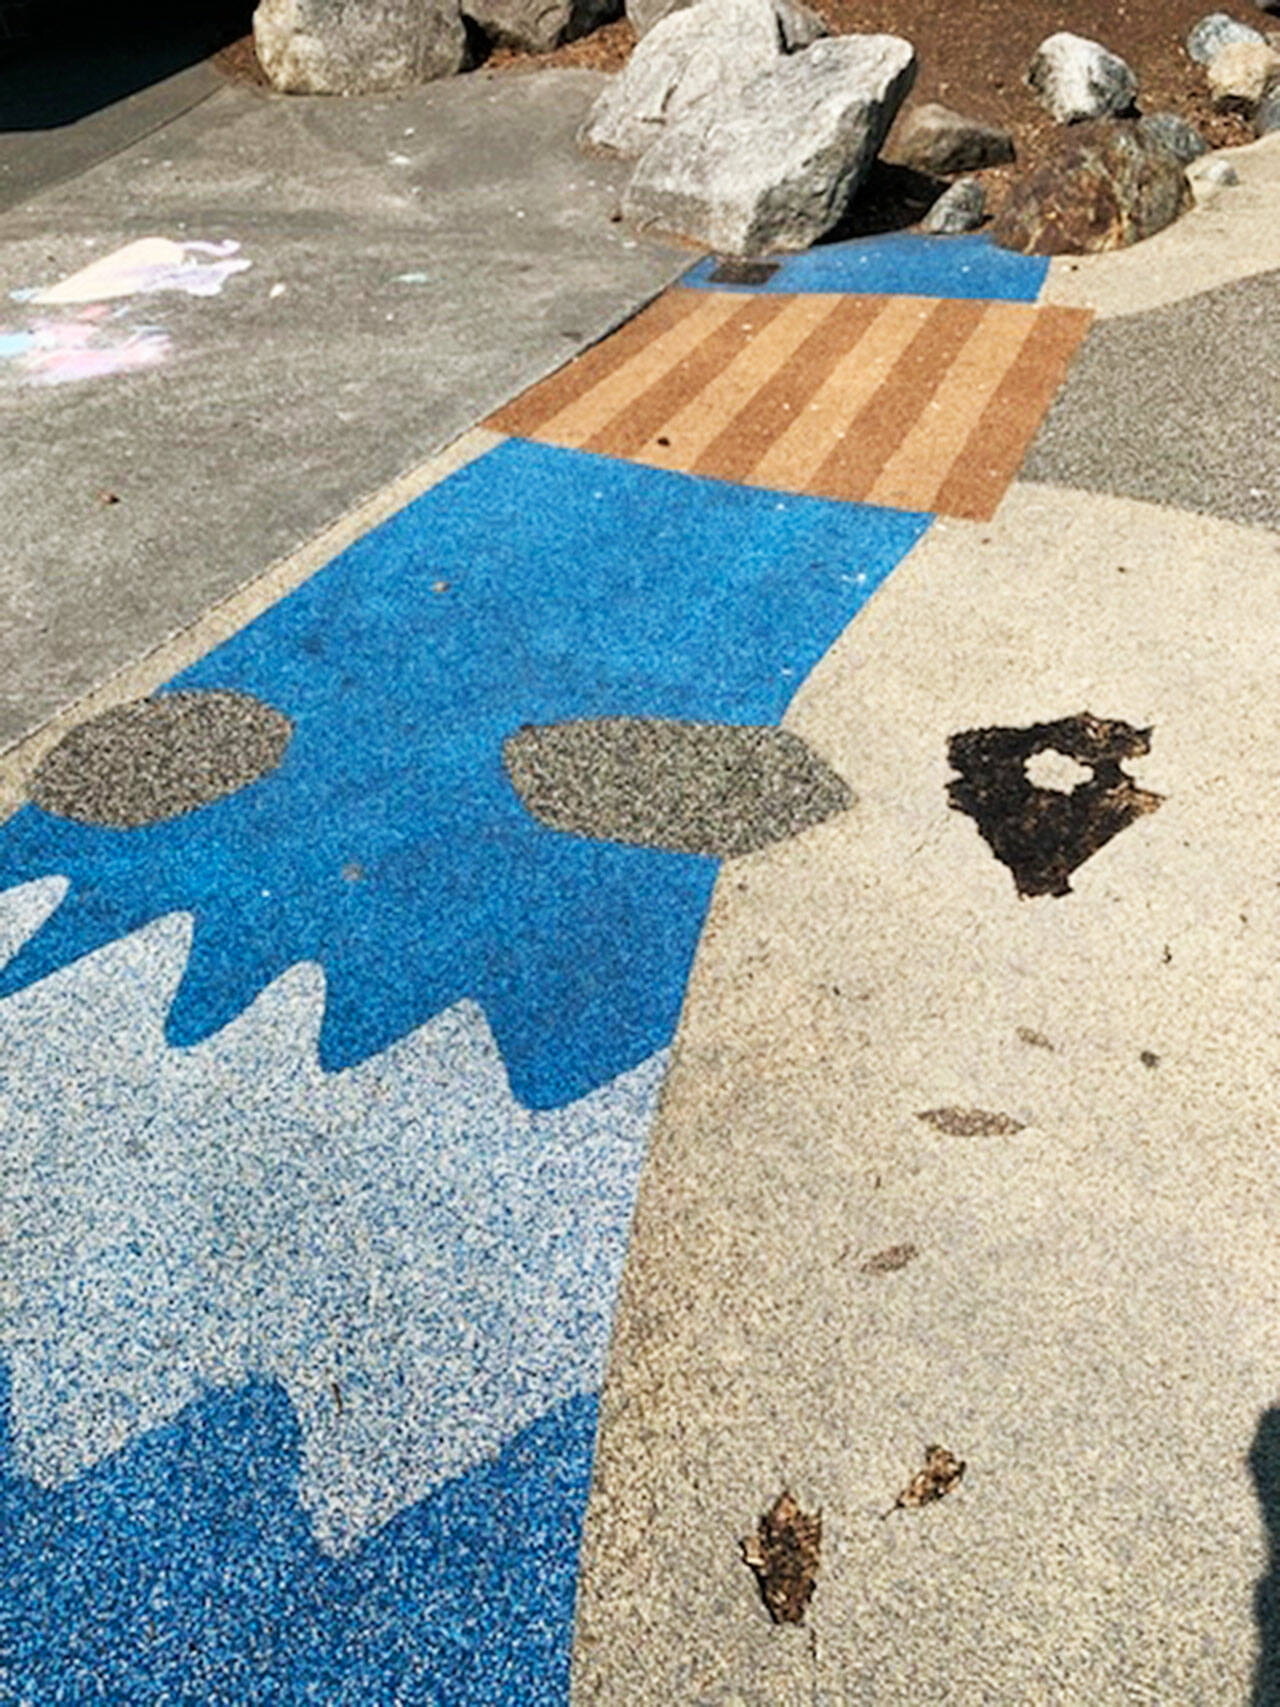 The wear and tear on the Lake Meridian Park playground surface. COURTESY PHOTO, City of Kent